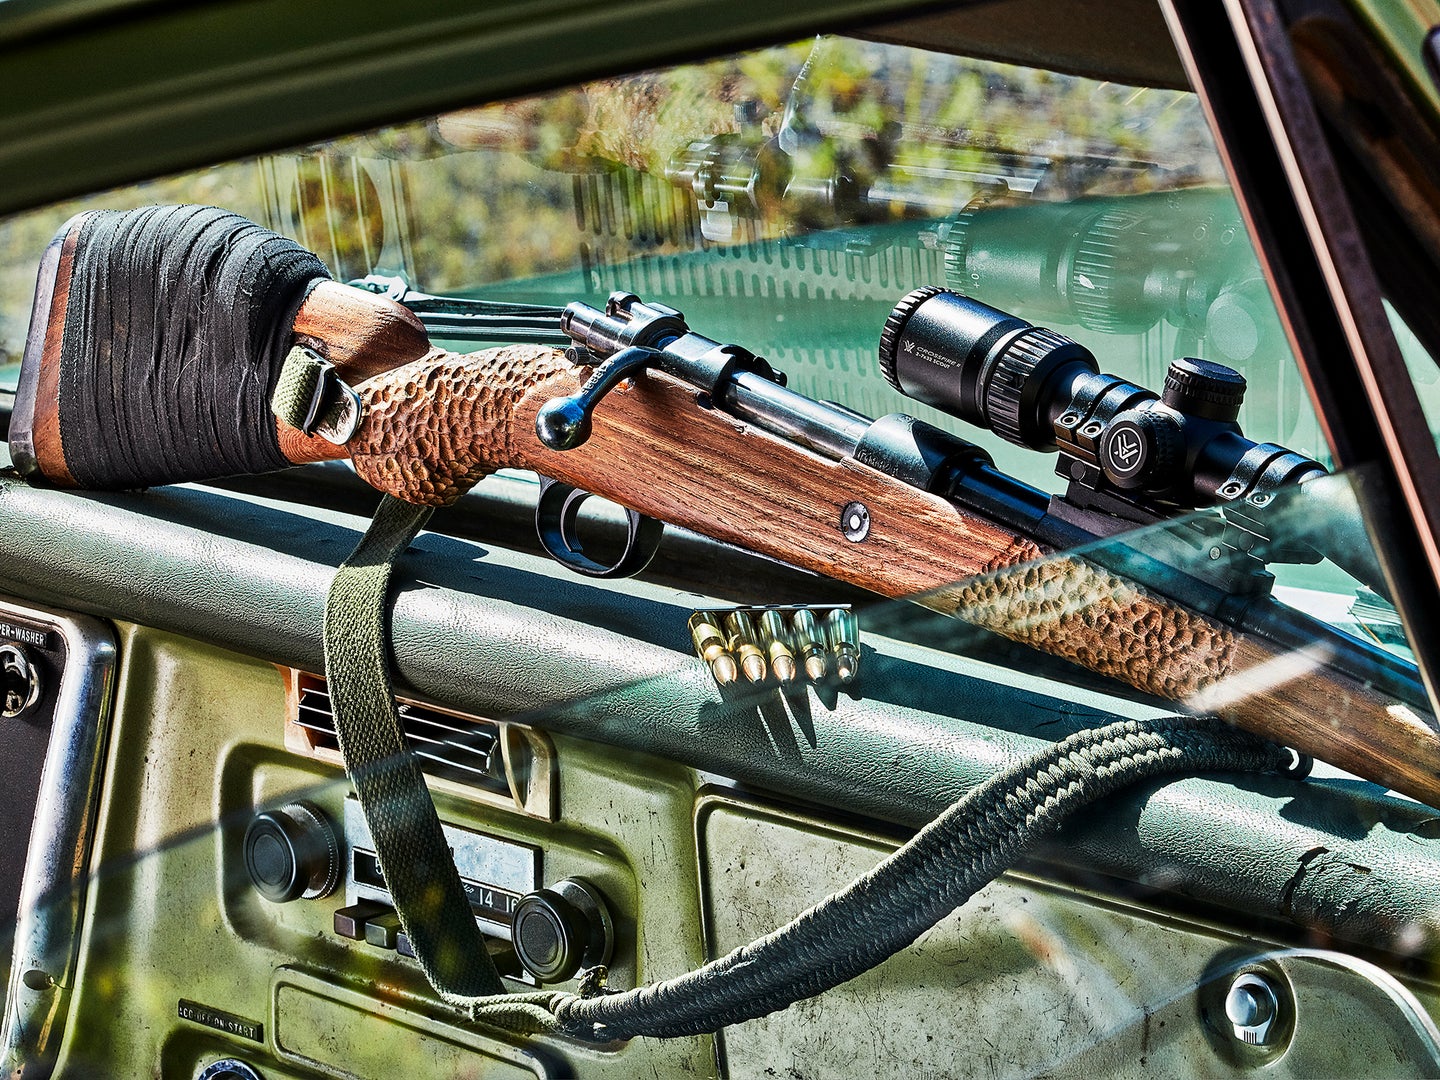 Scout rifle on the dash board of a pickup truck.